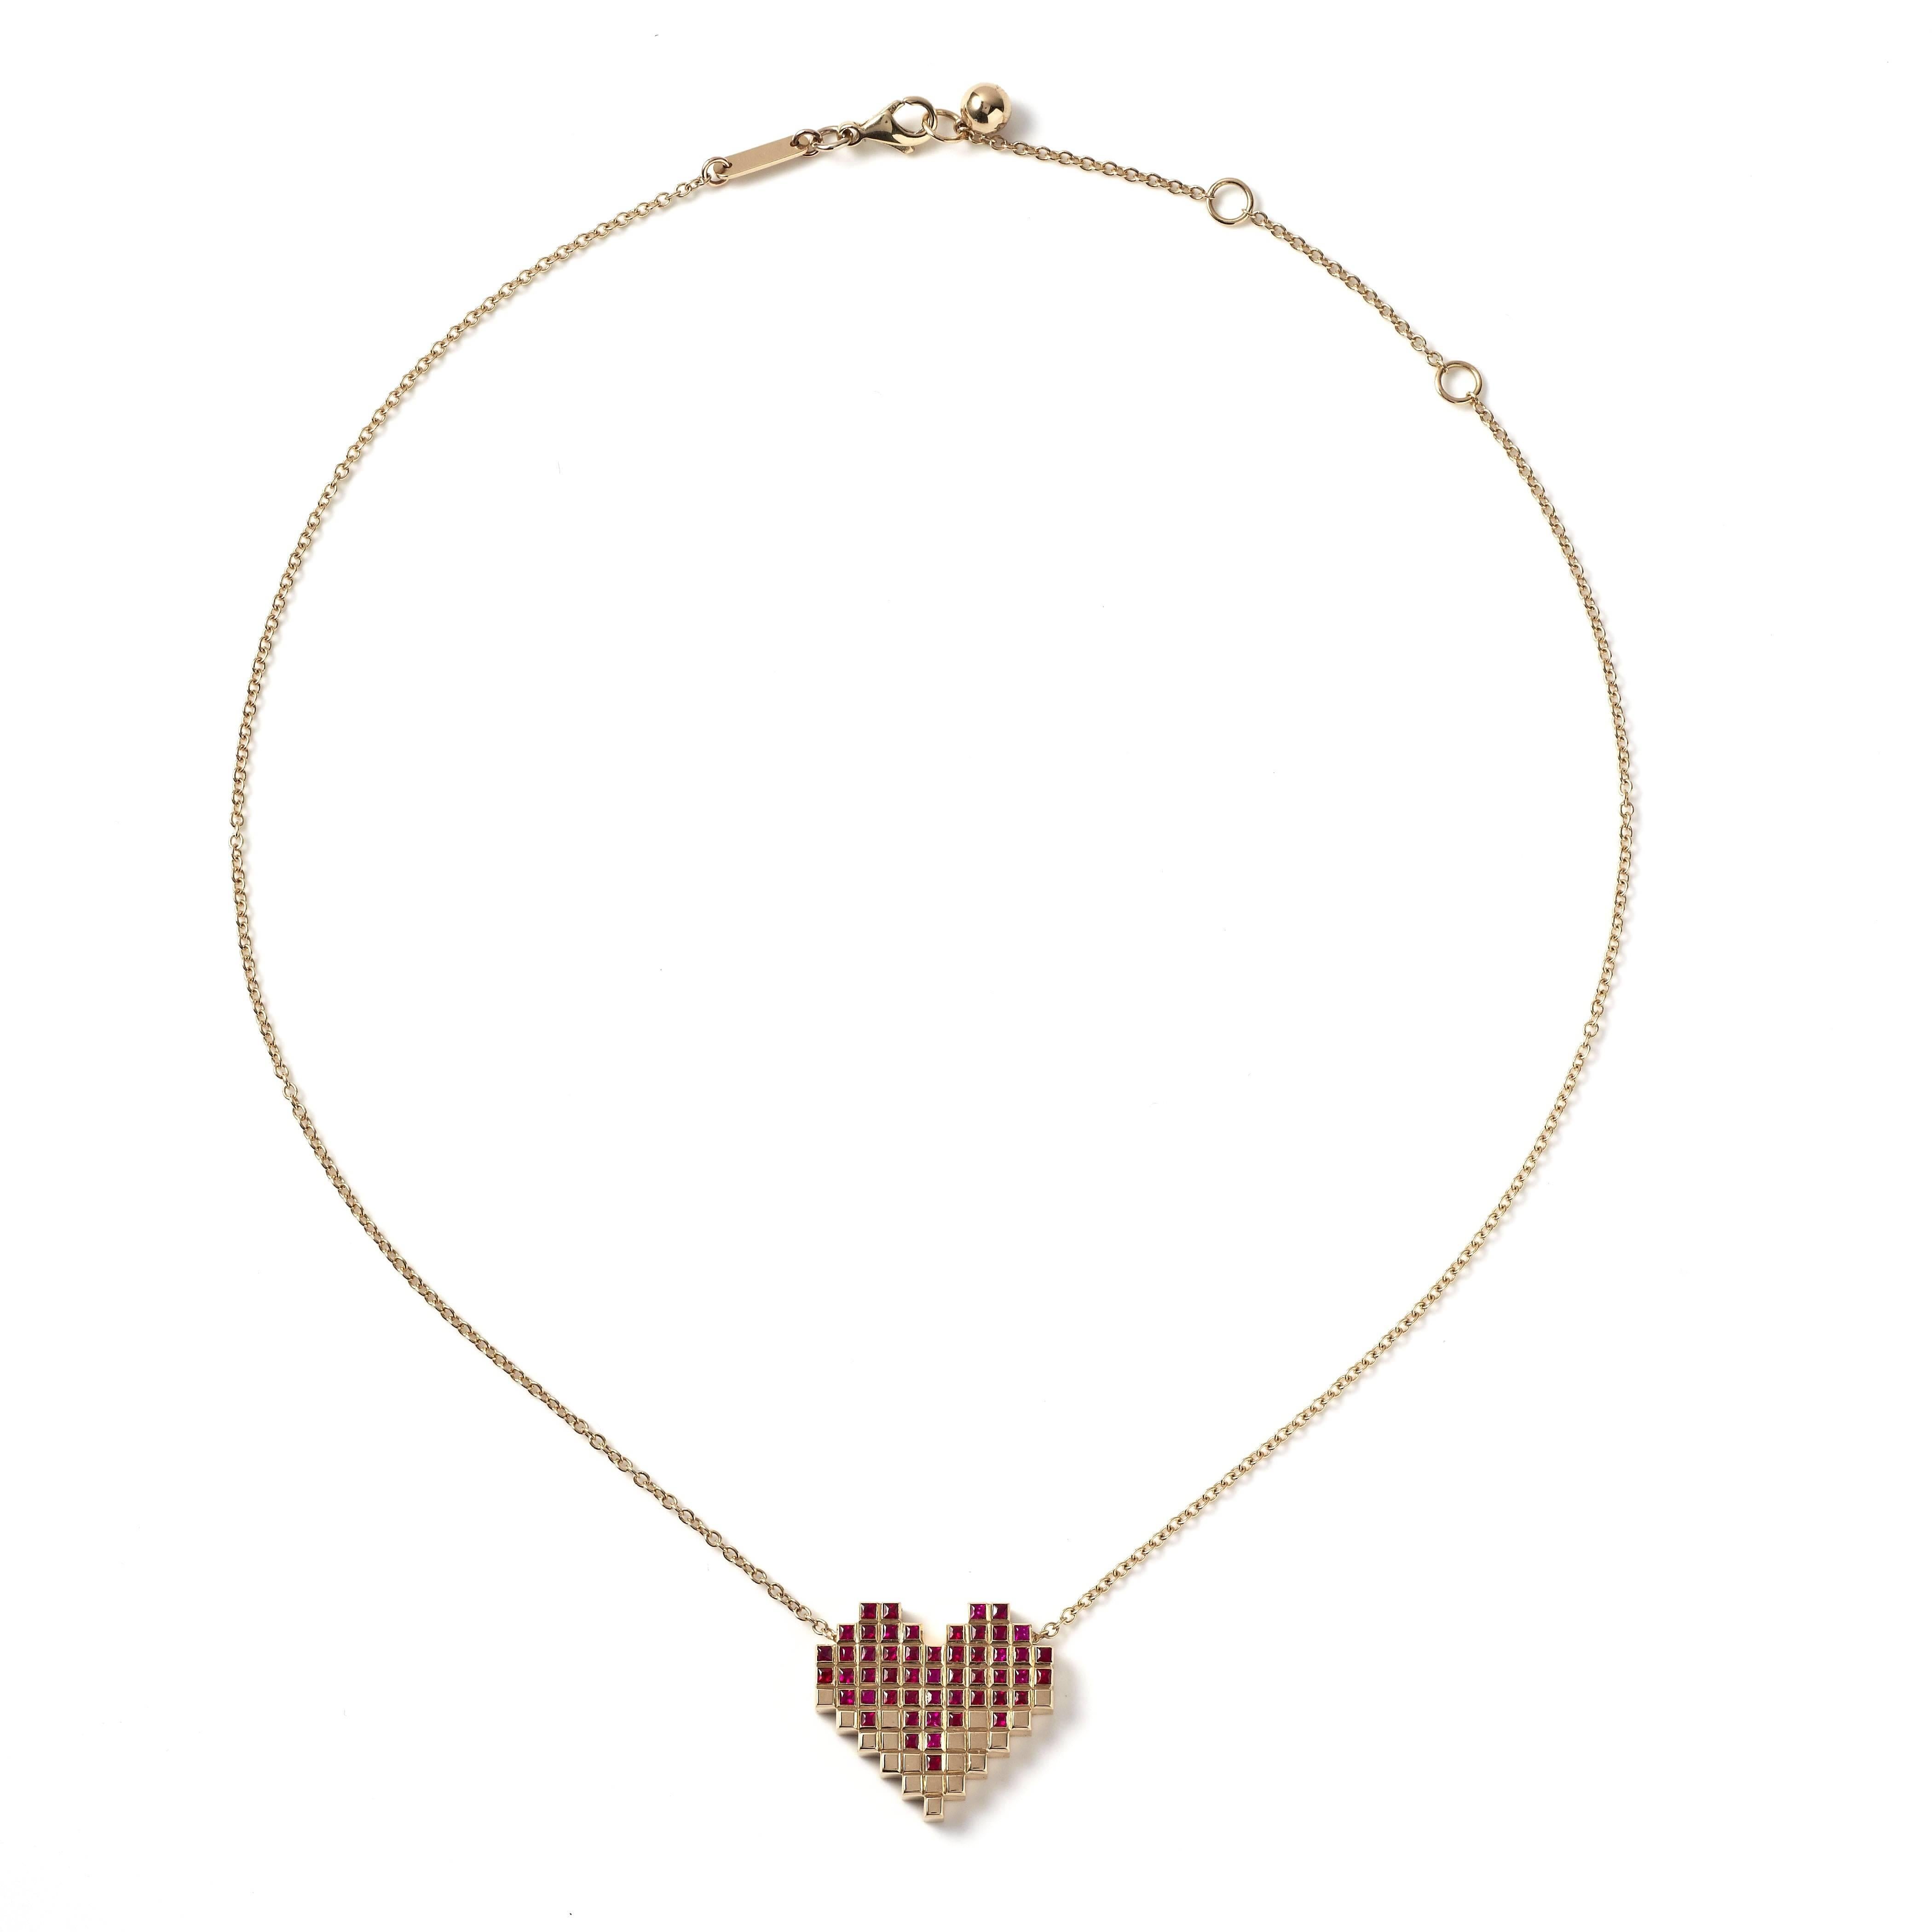 Yellow Gold and Ruby Pixel Heart Necklace by Francesca Grima 

18ct. Yellow Gold set with 51 Rubies on Yellow Gold Chain.

・Polished 18ct. Yellow Gold
・51 Princess-cut Rubies (1.02cts)
・Pendant length: 2cm
・Pendant width; 2.1cm
・Chain can be worn in